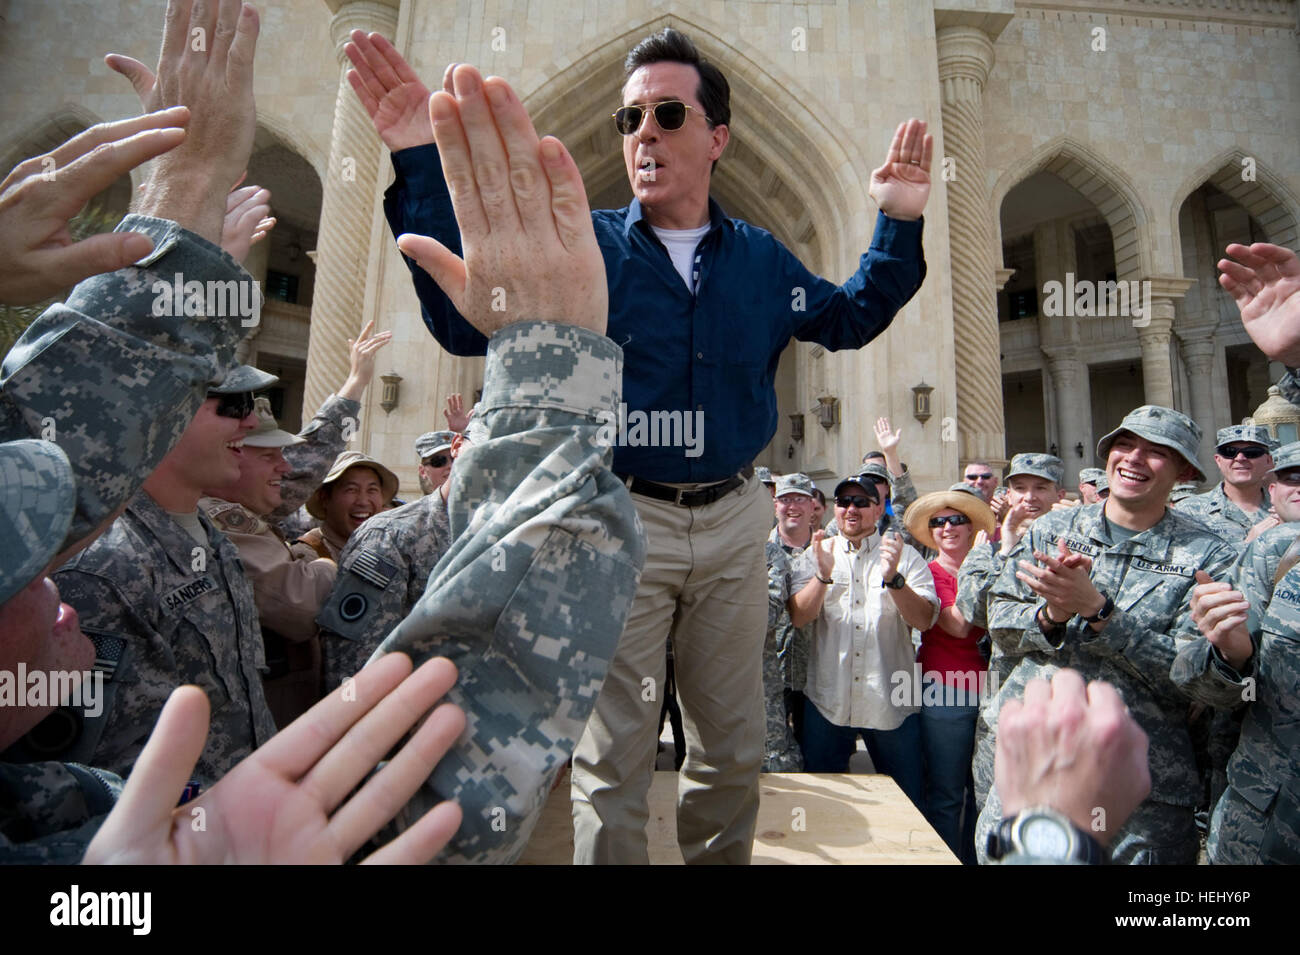 Stephen Colbert greets troops and civilians at Al Faw Palace at Camp Victory in Baghdad, Iraq, on June 5 as part of his 'Operation Iraqi Stephen: Going Command' tour. Operation Iraqi Stephen 178745 Stock Photo